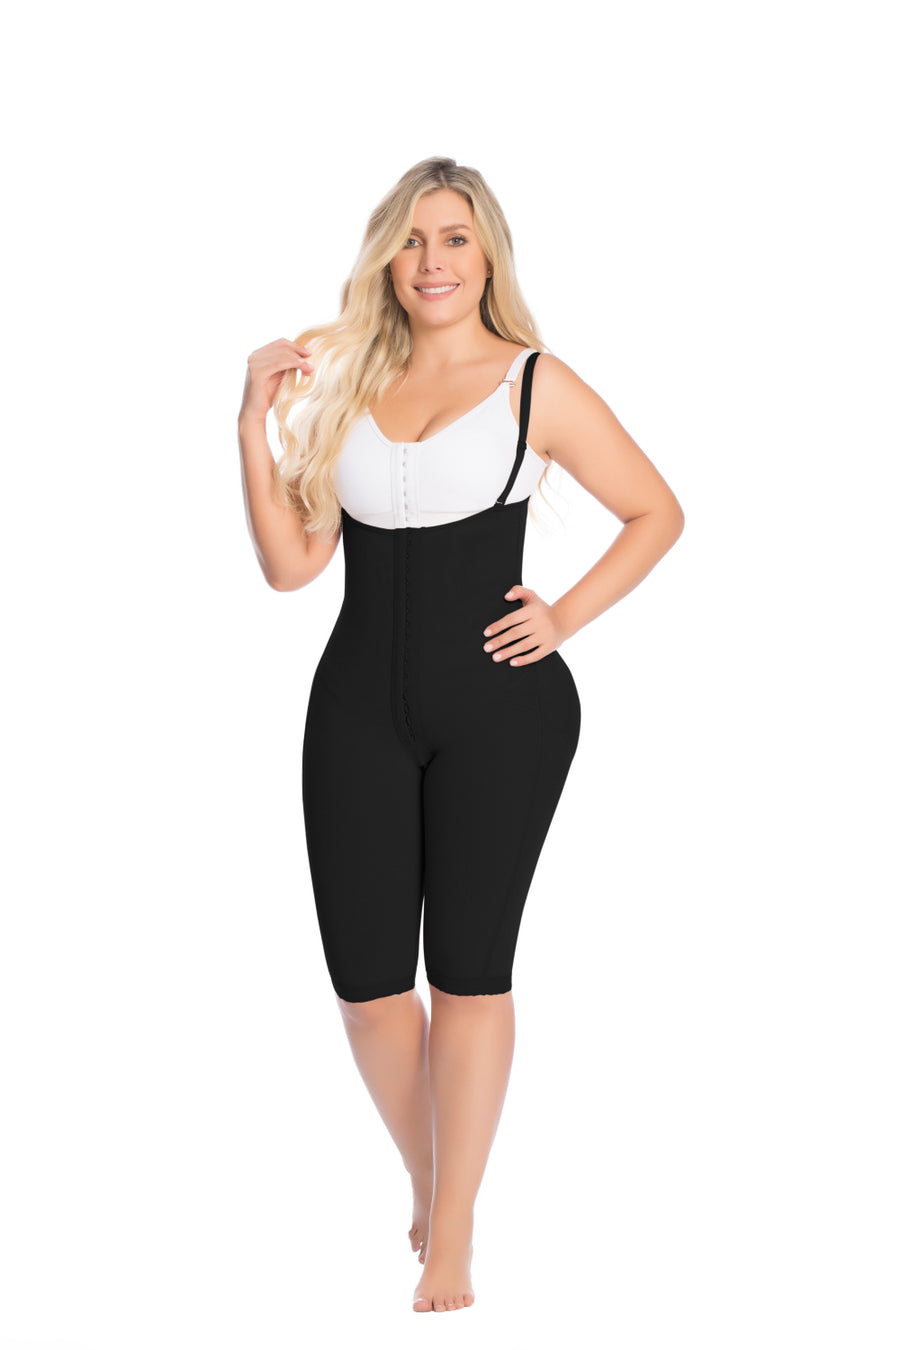 ShapEager Body Shapers Shapewear and Fajas-Women Extreme Shaper